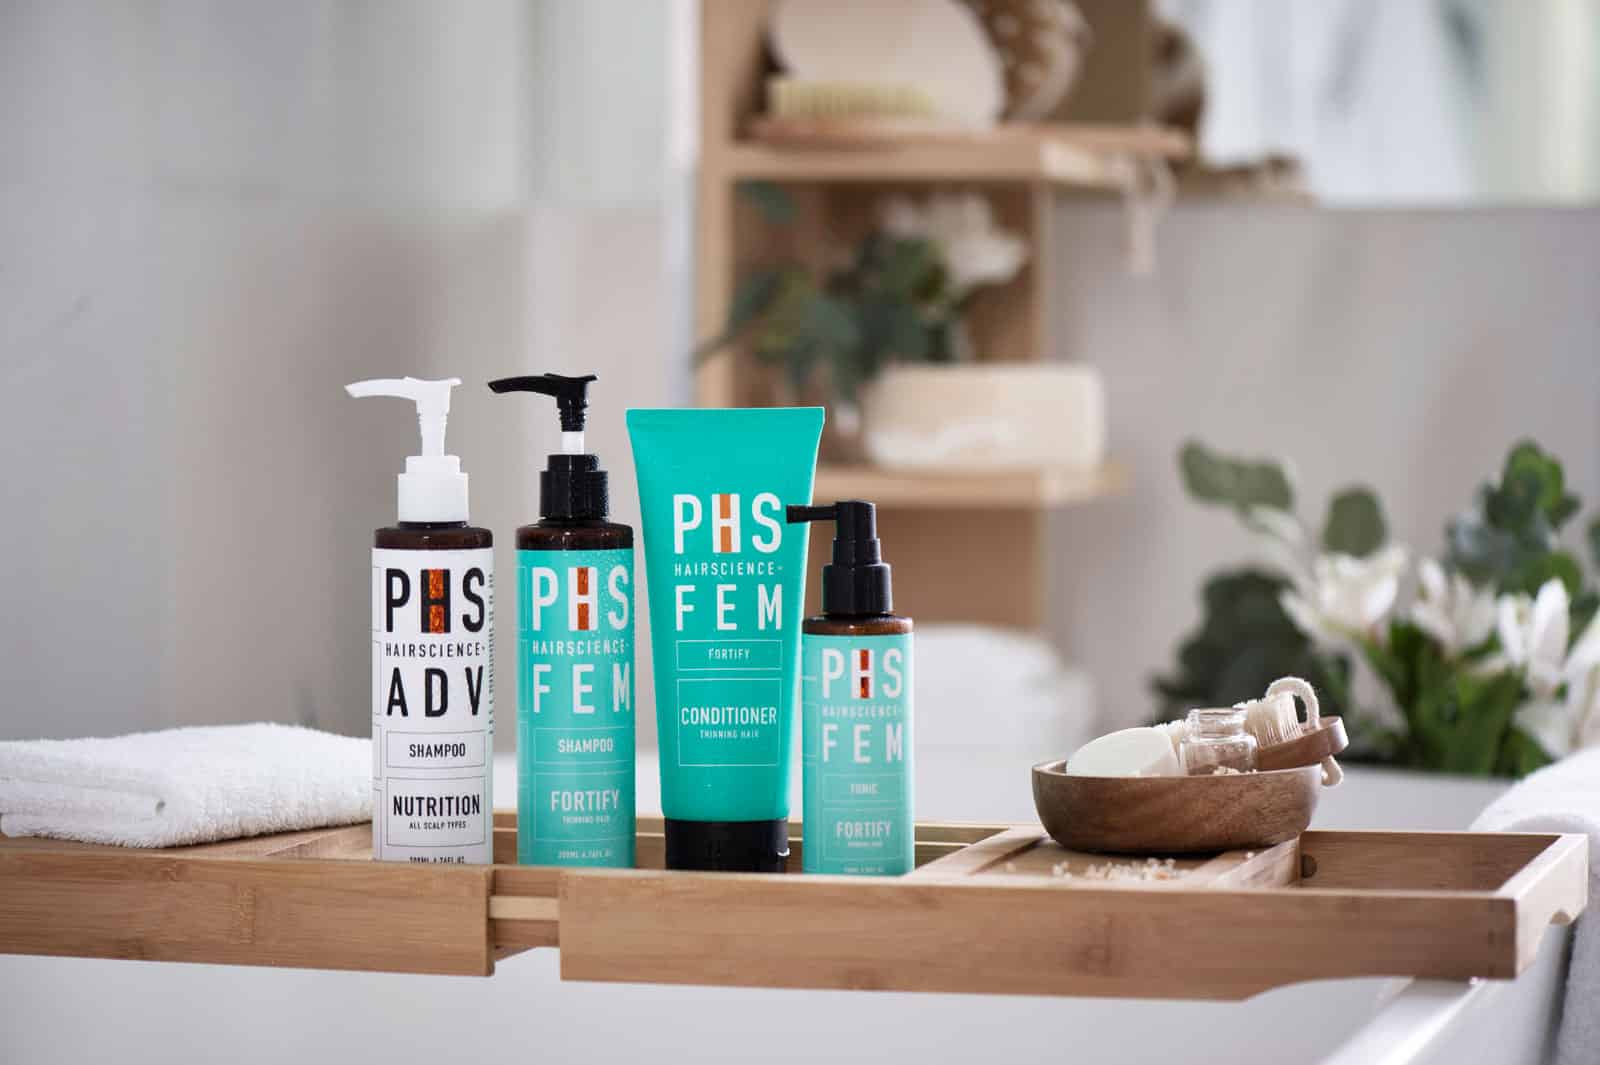 PHS HAIRSCIENCE hair wash regime for women with fine hair